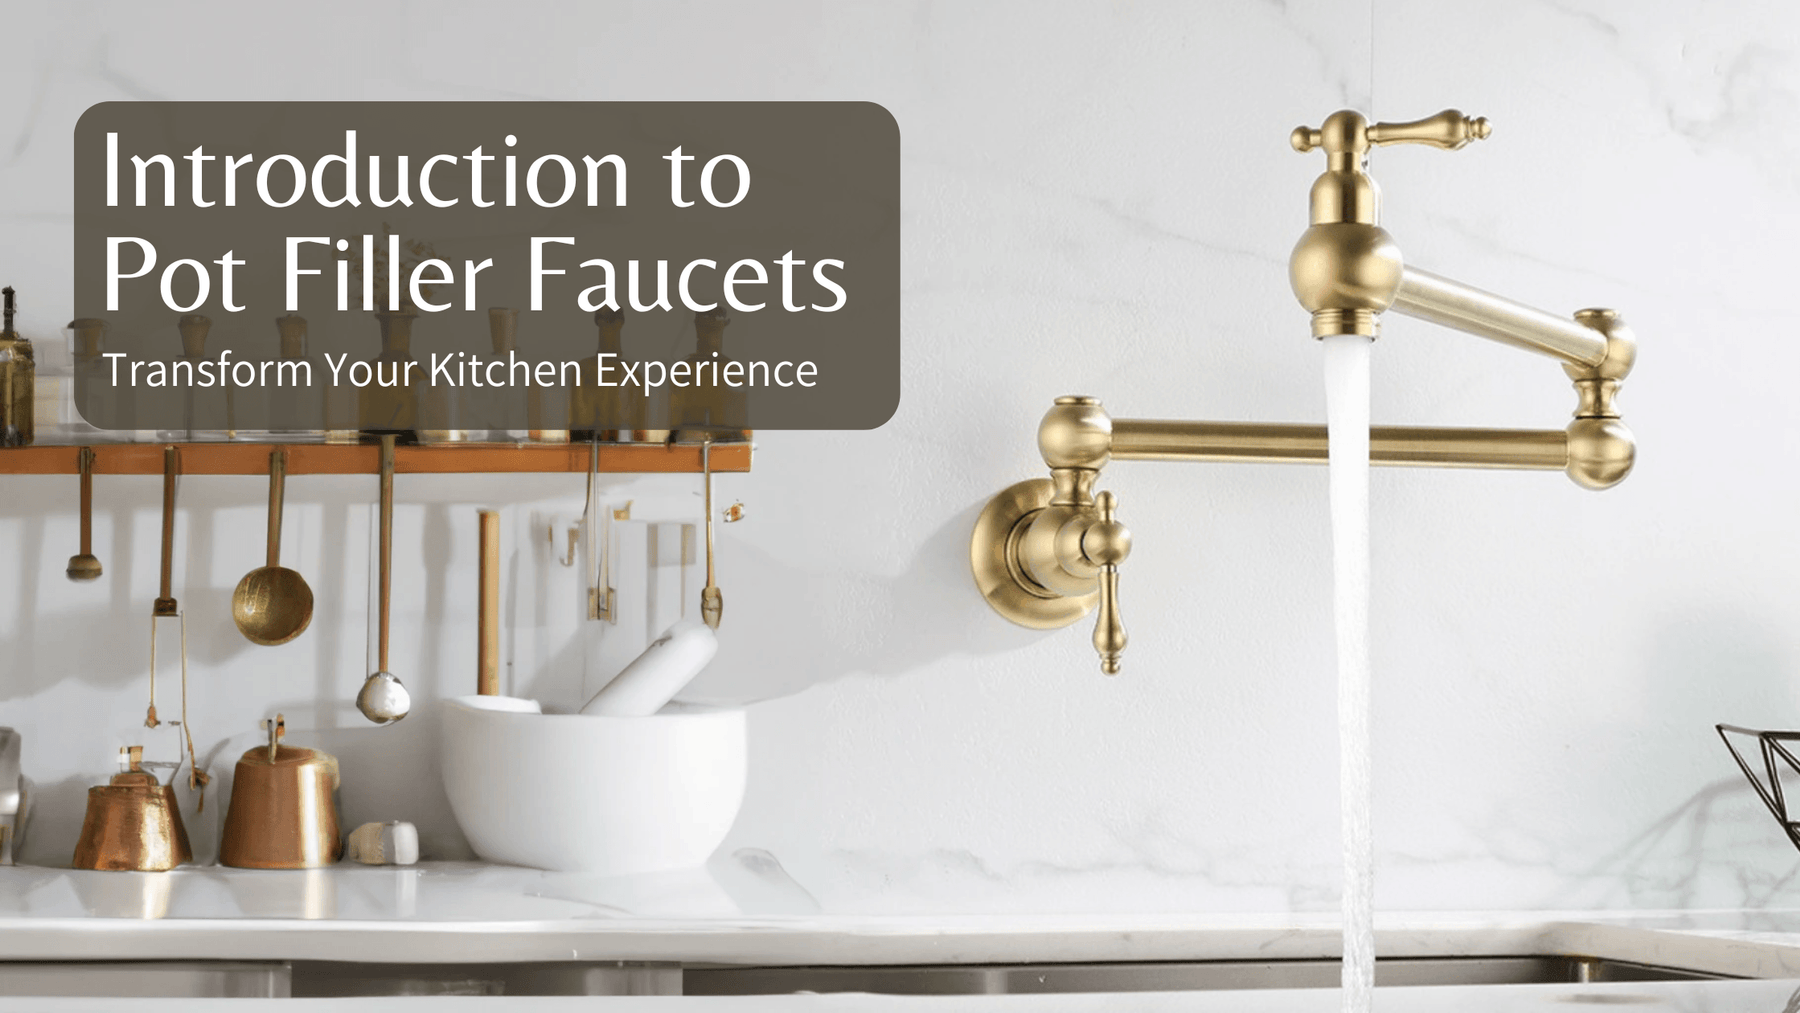 Introduction to Pot Filler Faucets Transform Your Kitchen Experience